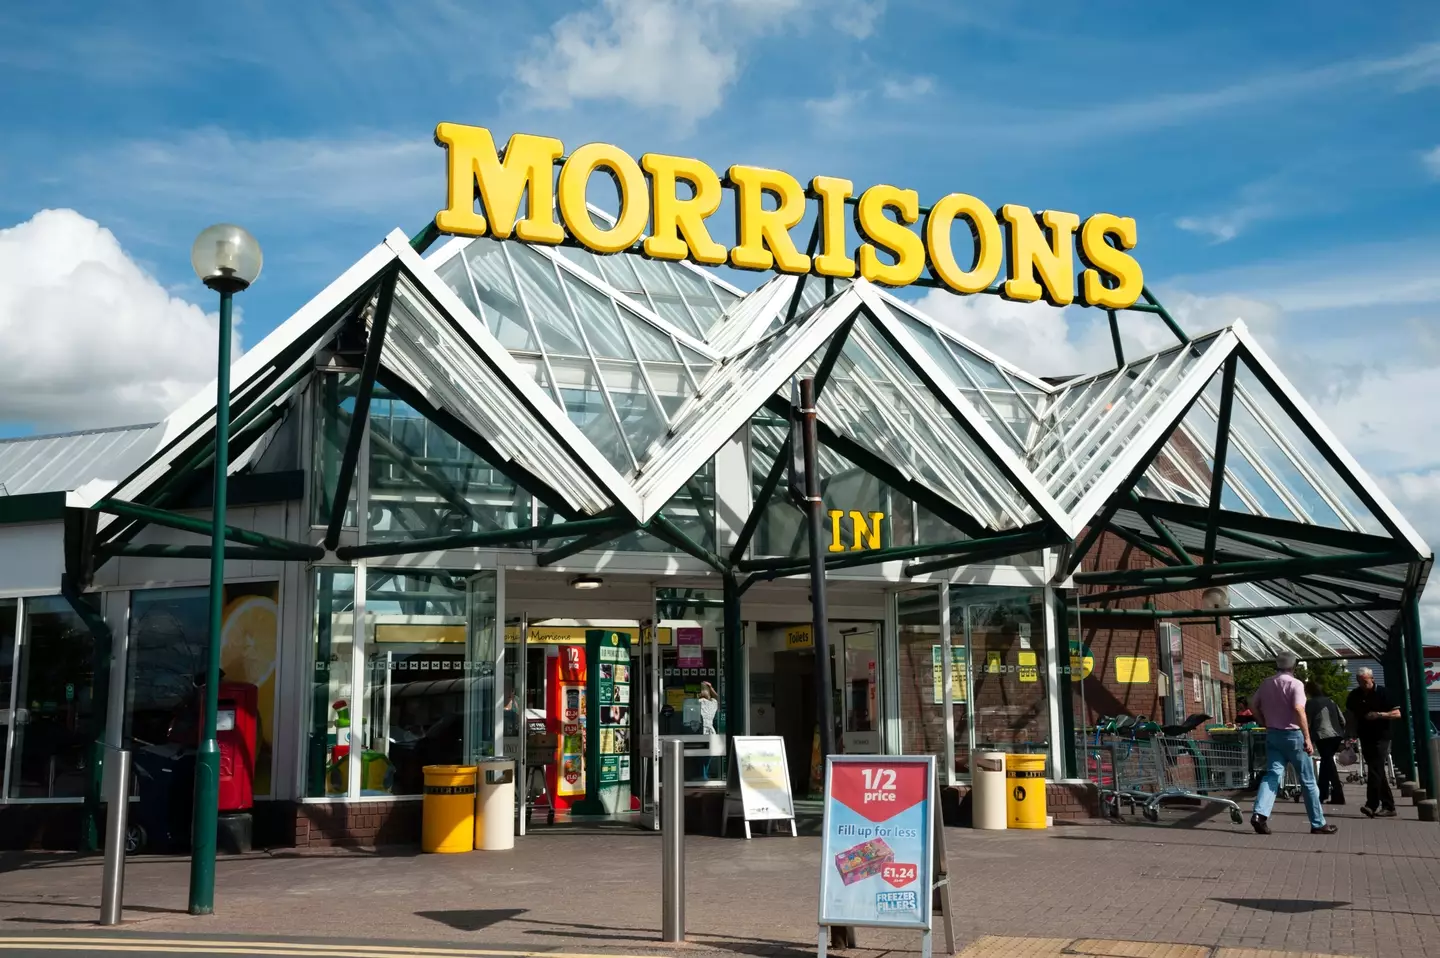 The prices at Morrisons in Manchester have reportedly increased.